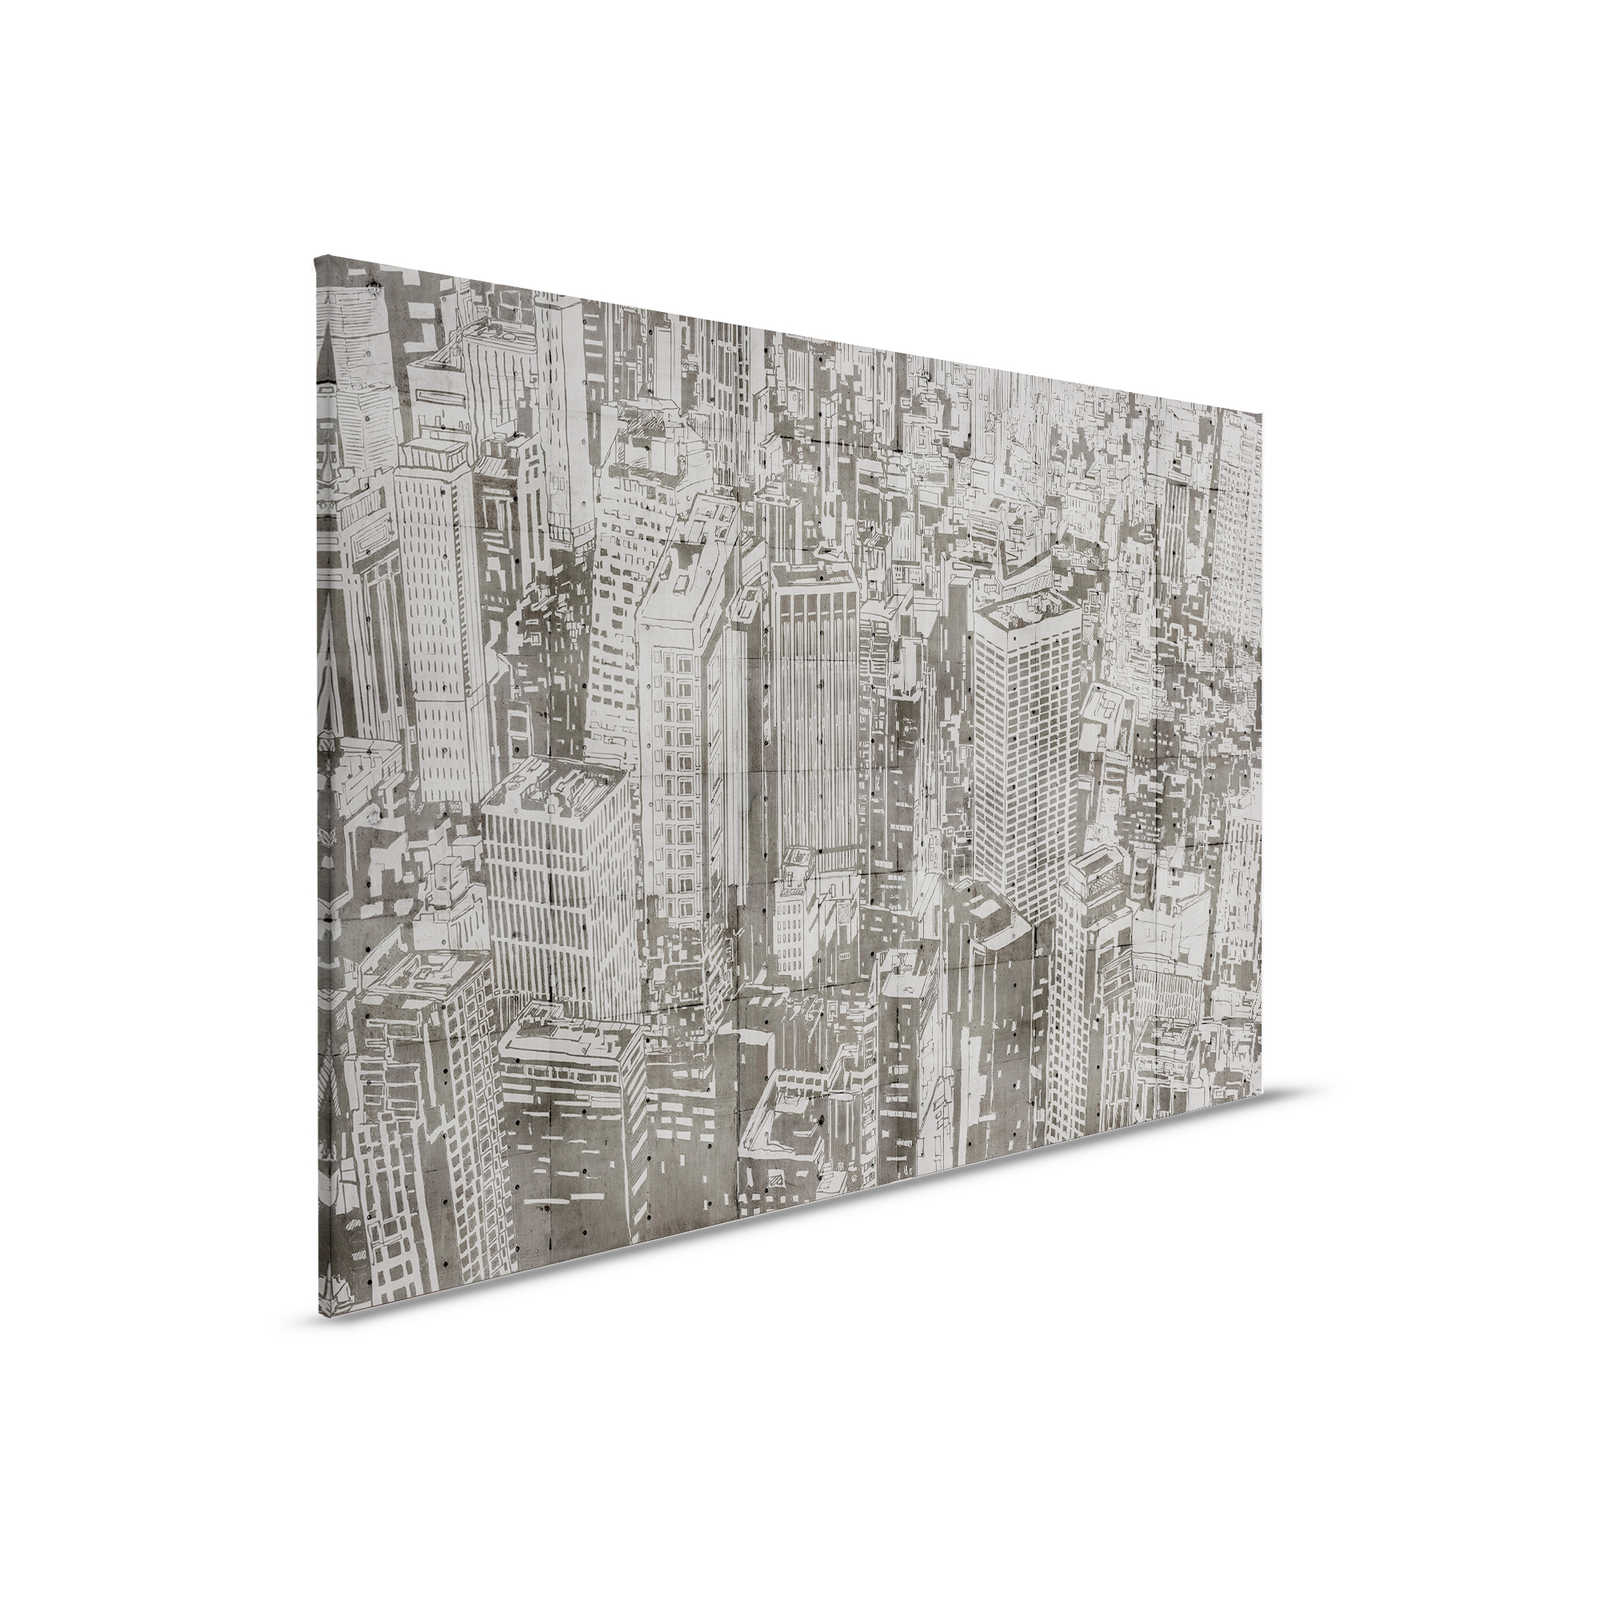 Downtown 2 - Concrete Structure Canvas Painting New York Look - 0.90 m x 0.60 m
